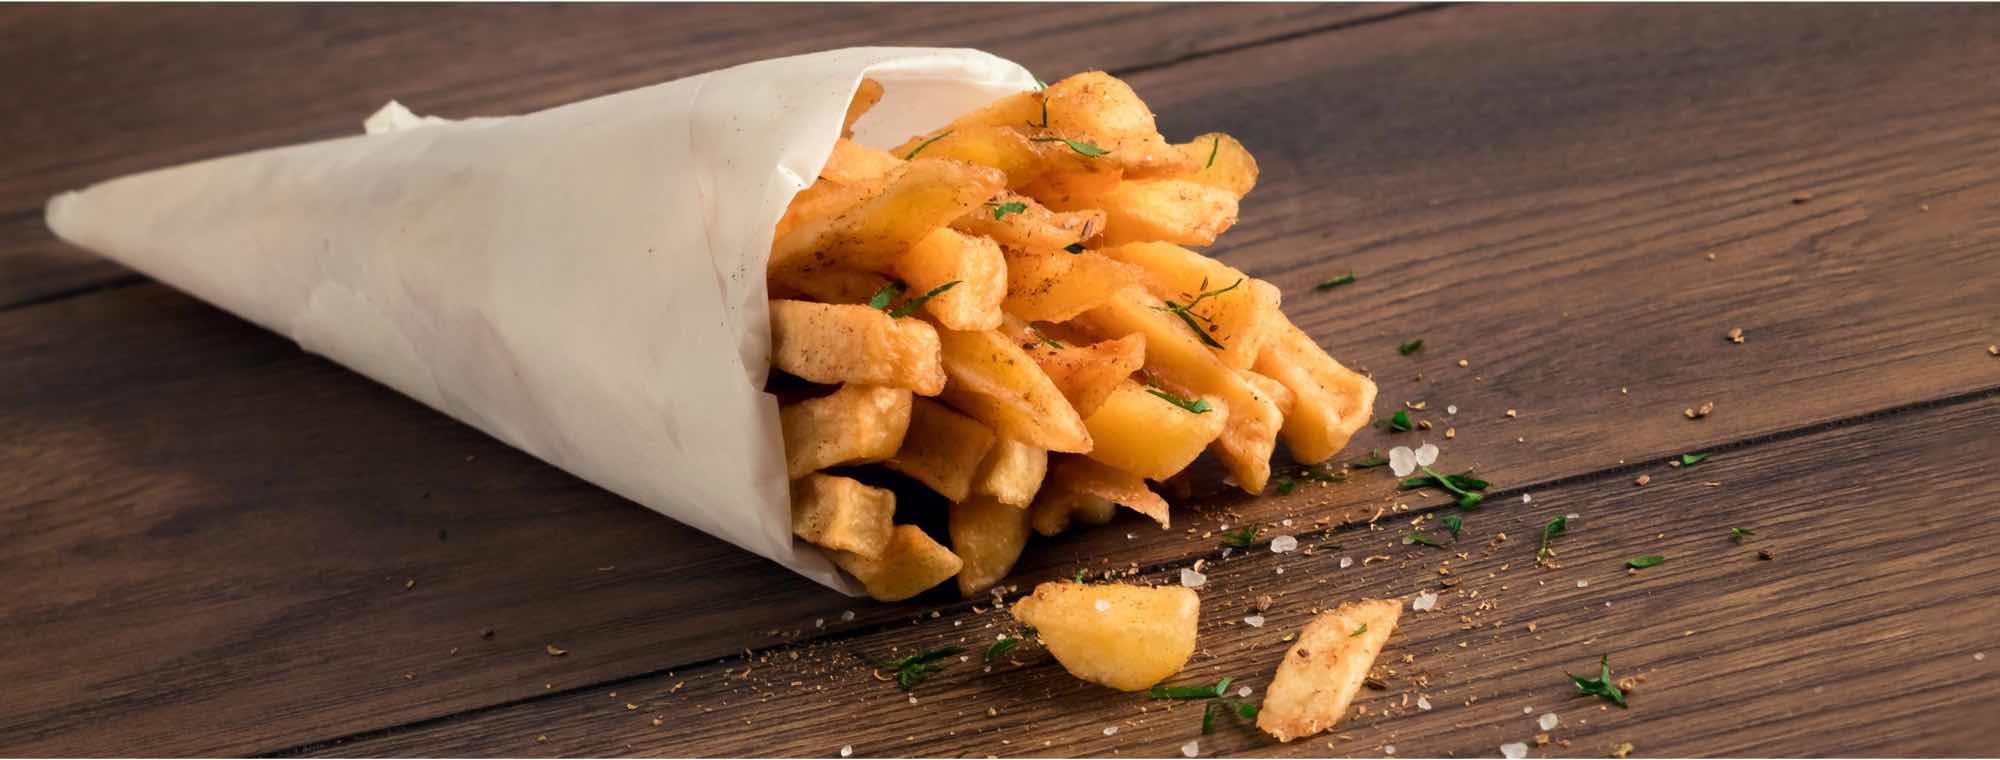 Fresh hot chips are packaged in an open paper bag